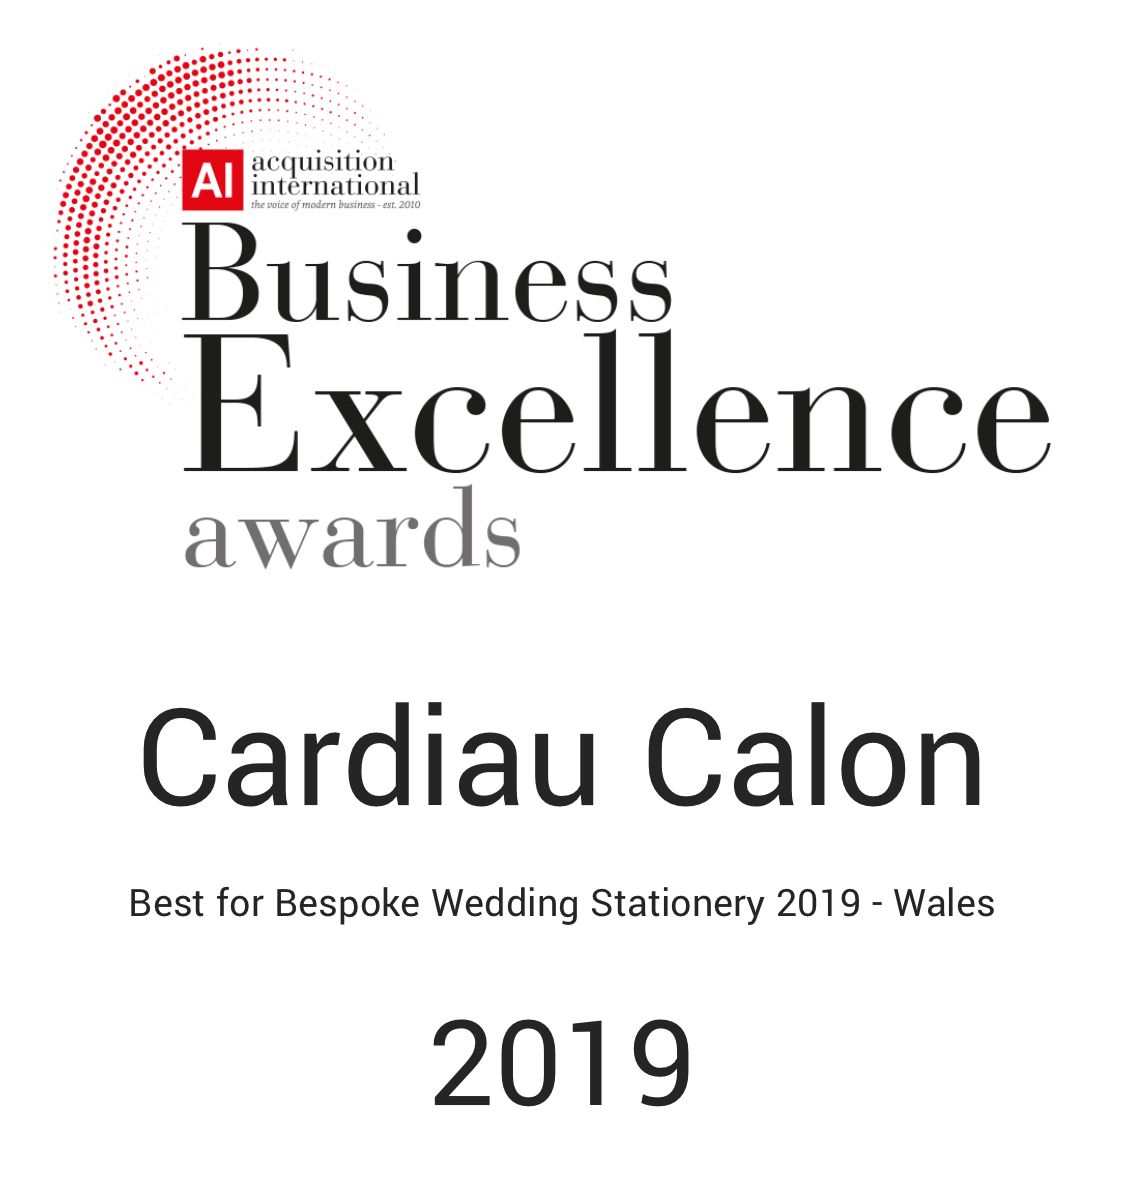 Business Excellence Awards - Best for Bespoke Wedding Stationery 2019 - Wales